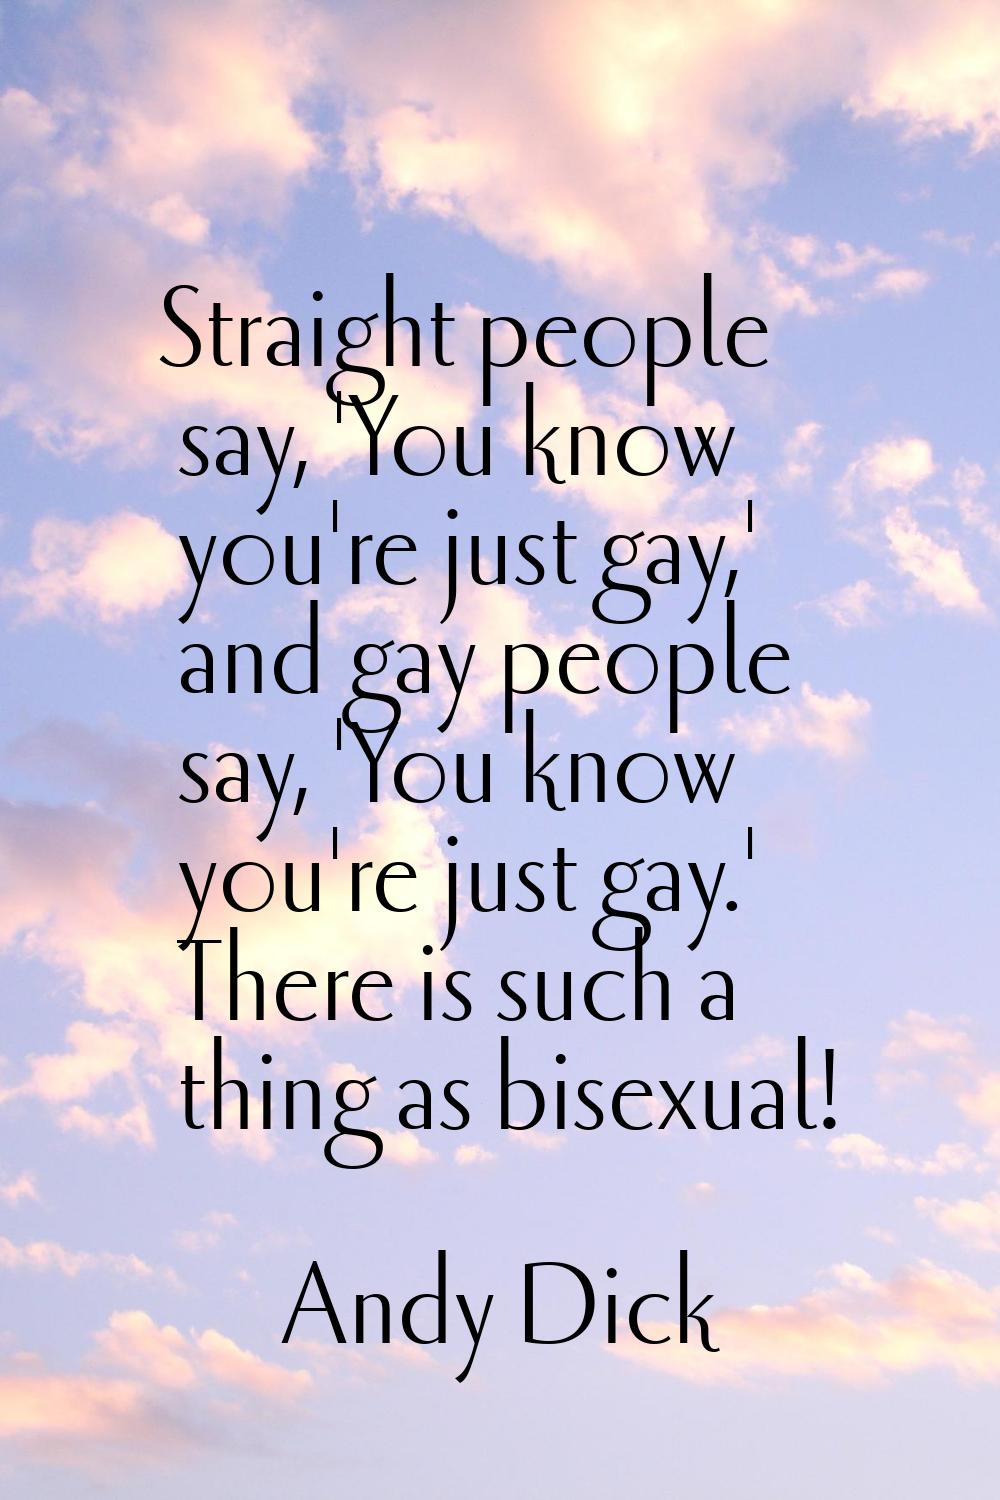 Straight people say, 'You know you're just gay,' and gay people say, 'You know you're just gay.' Th